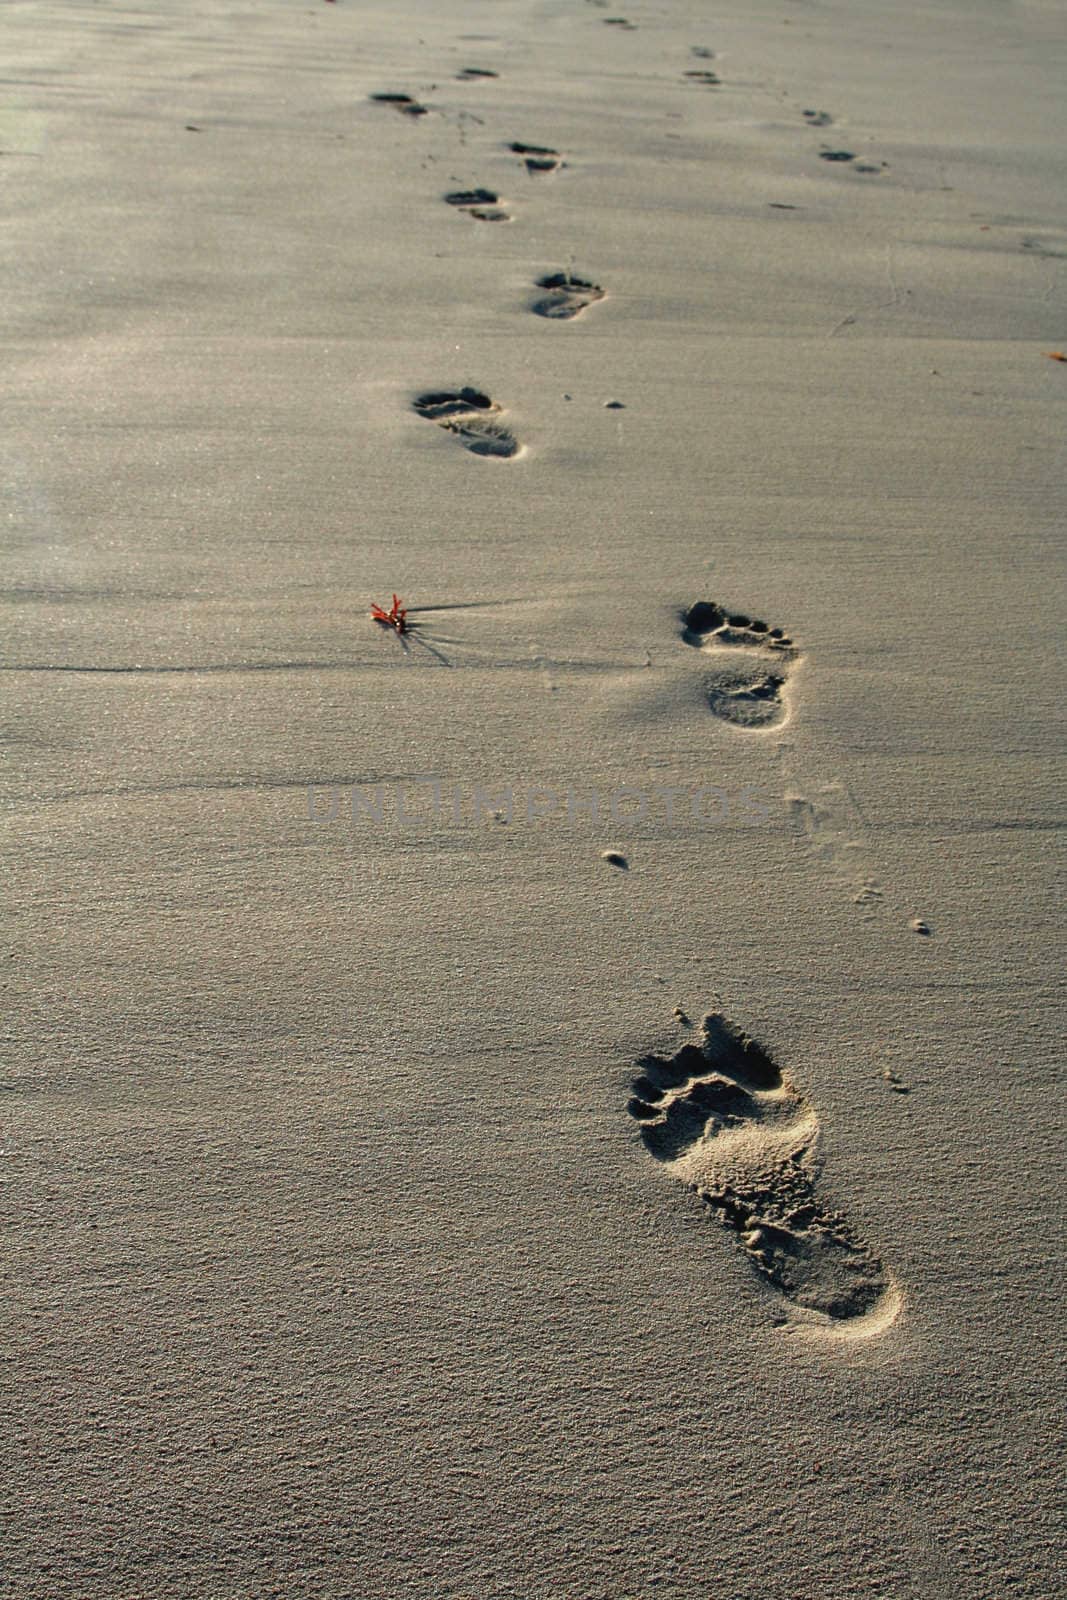 Footprints in the sand at dusk.